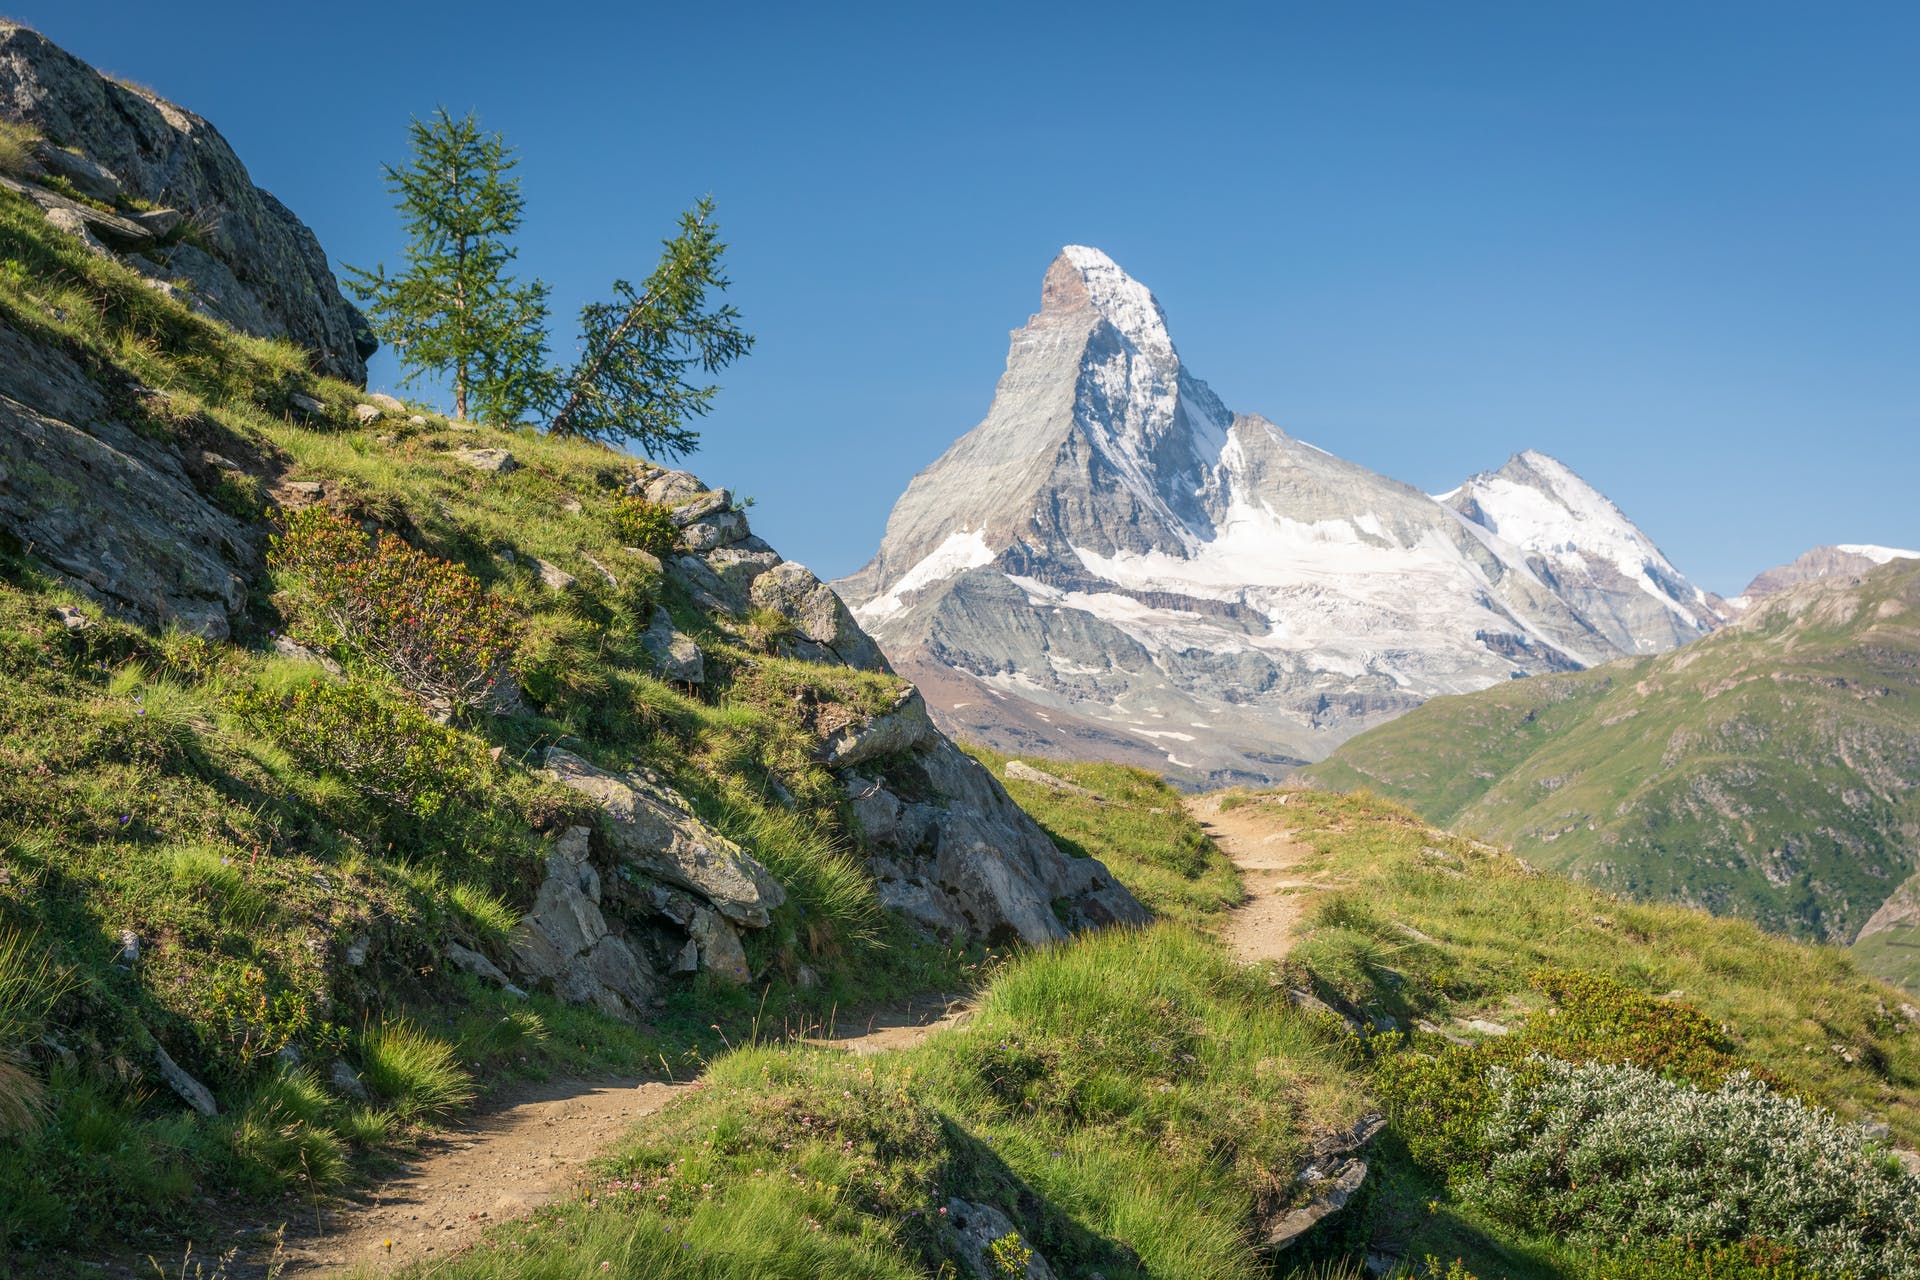 A view of the Matterhorn in the Alps, one of Europe's highest mountains.